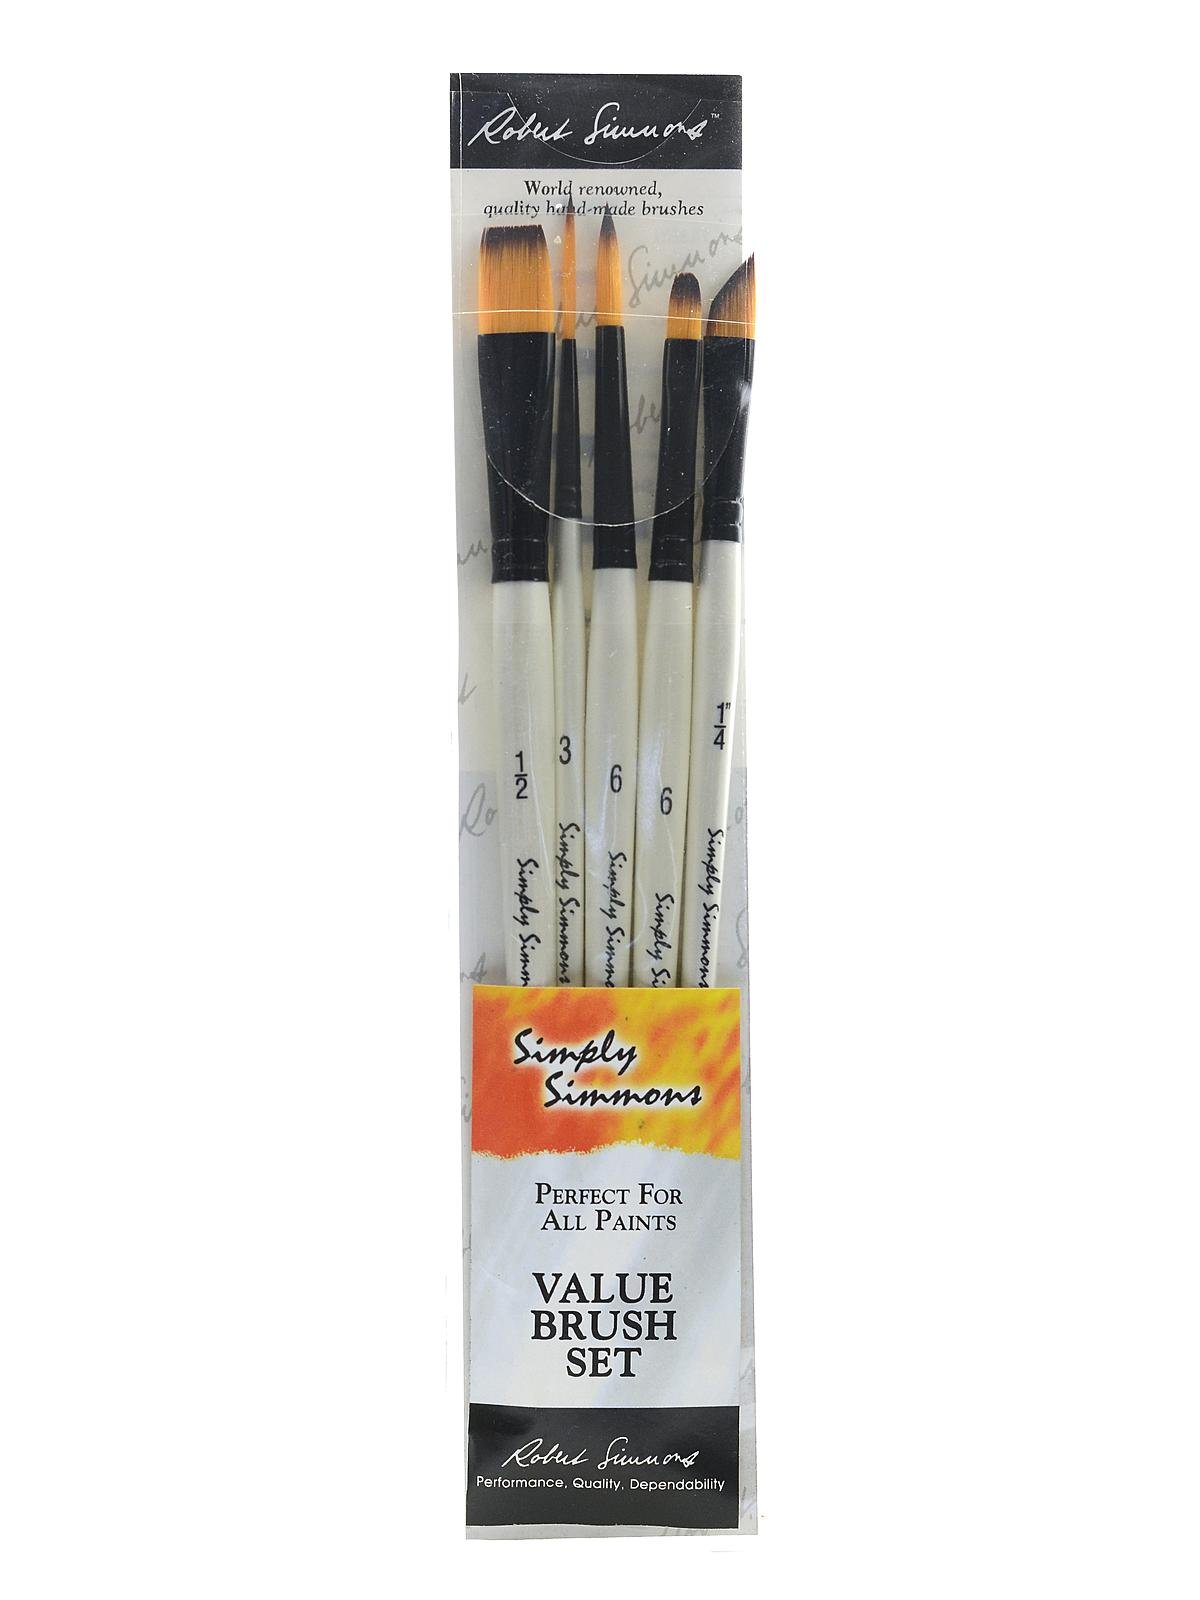 Watercolor Brushes - Set of 5